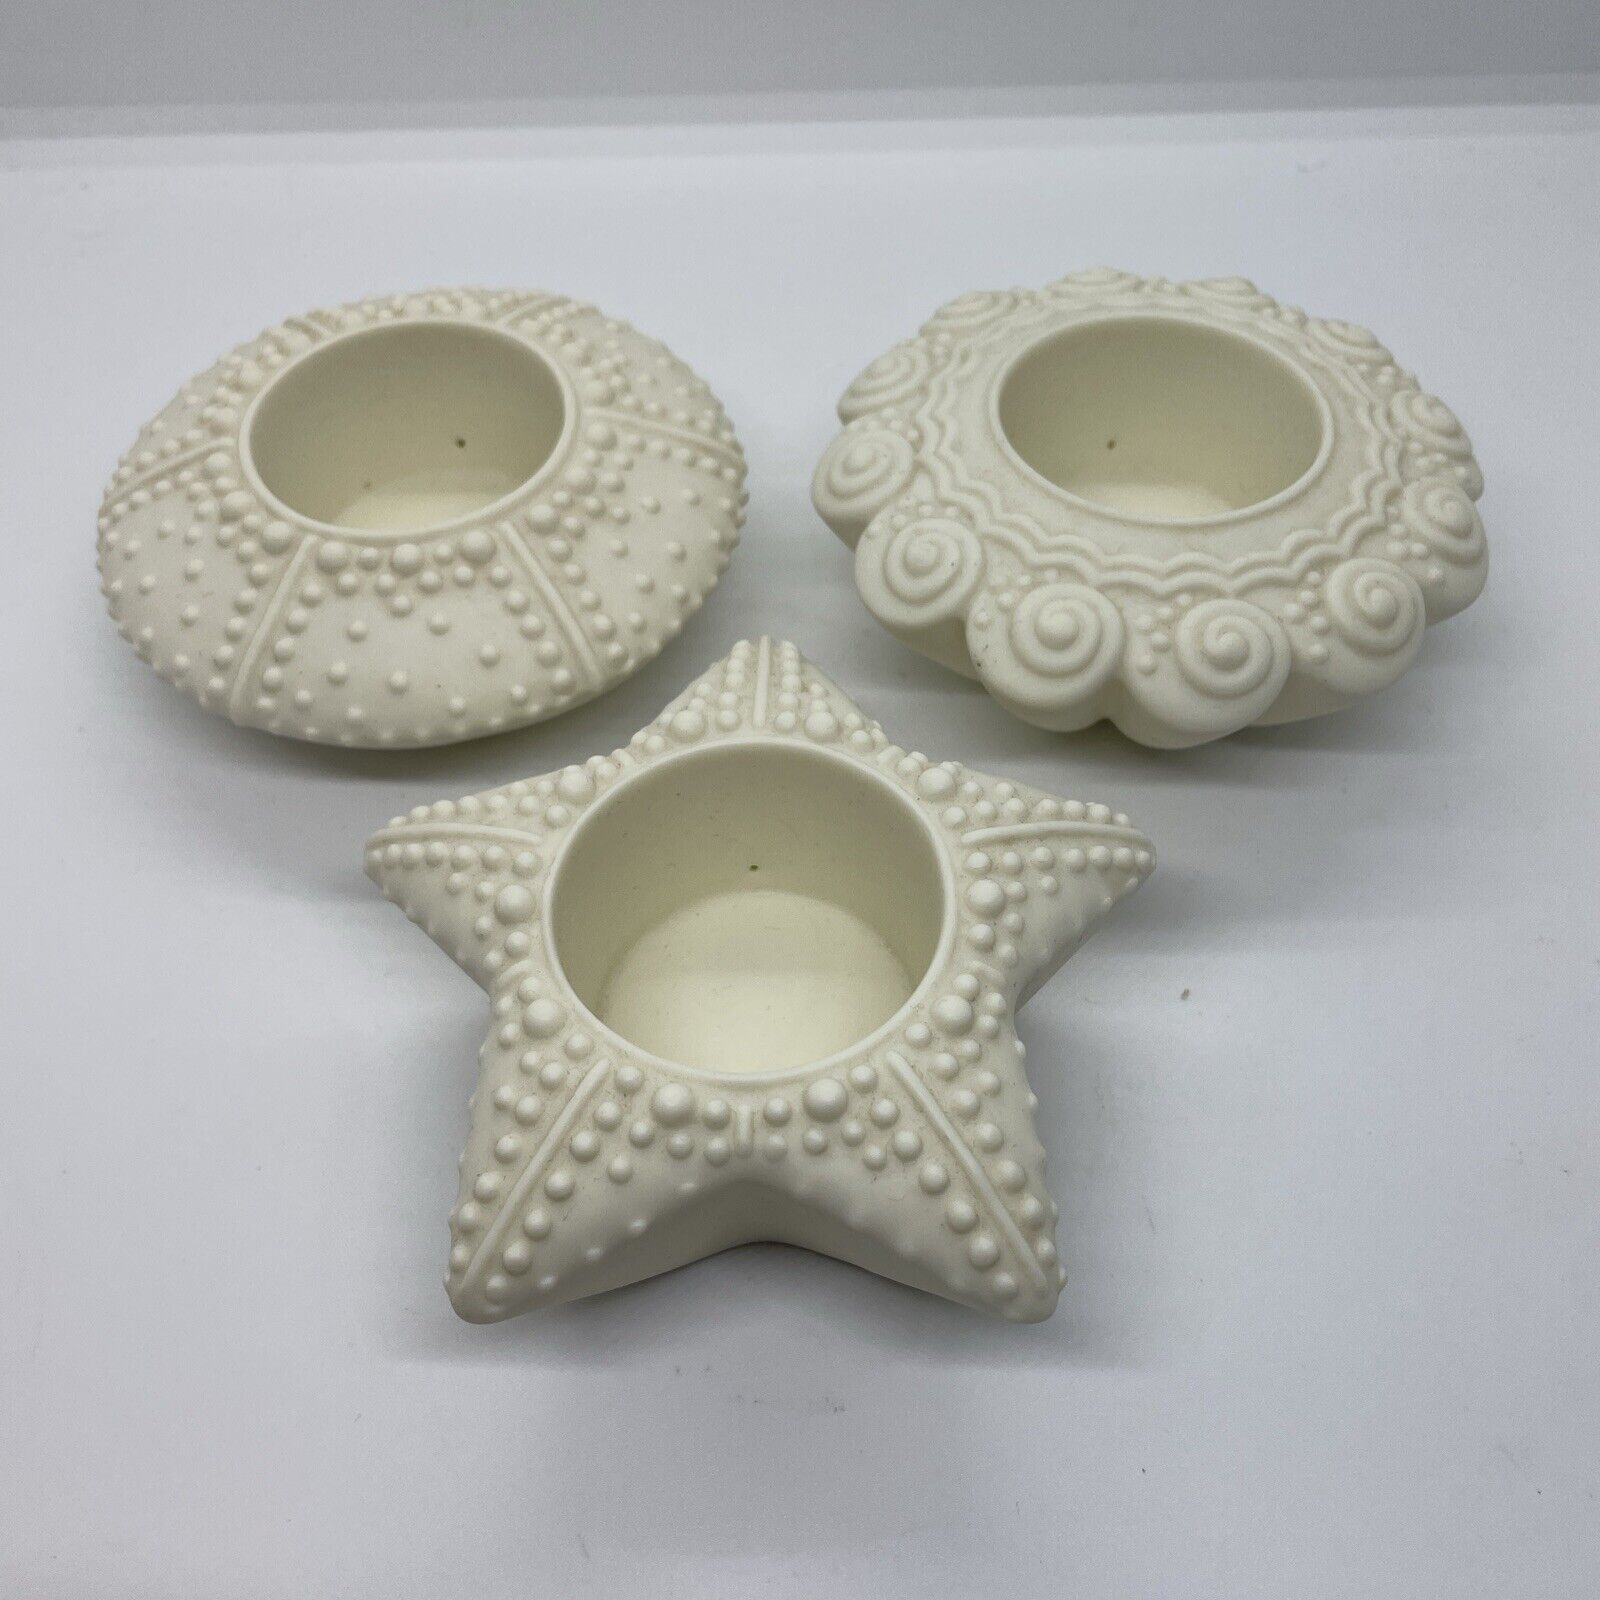 PartyLite Sea Drifters Tealight Votive Candle Holders P7103 Shells Starfish